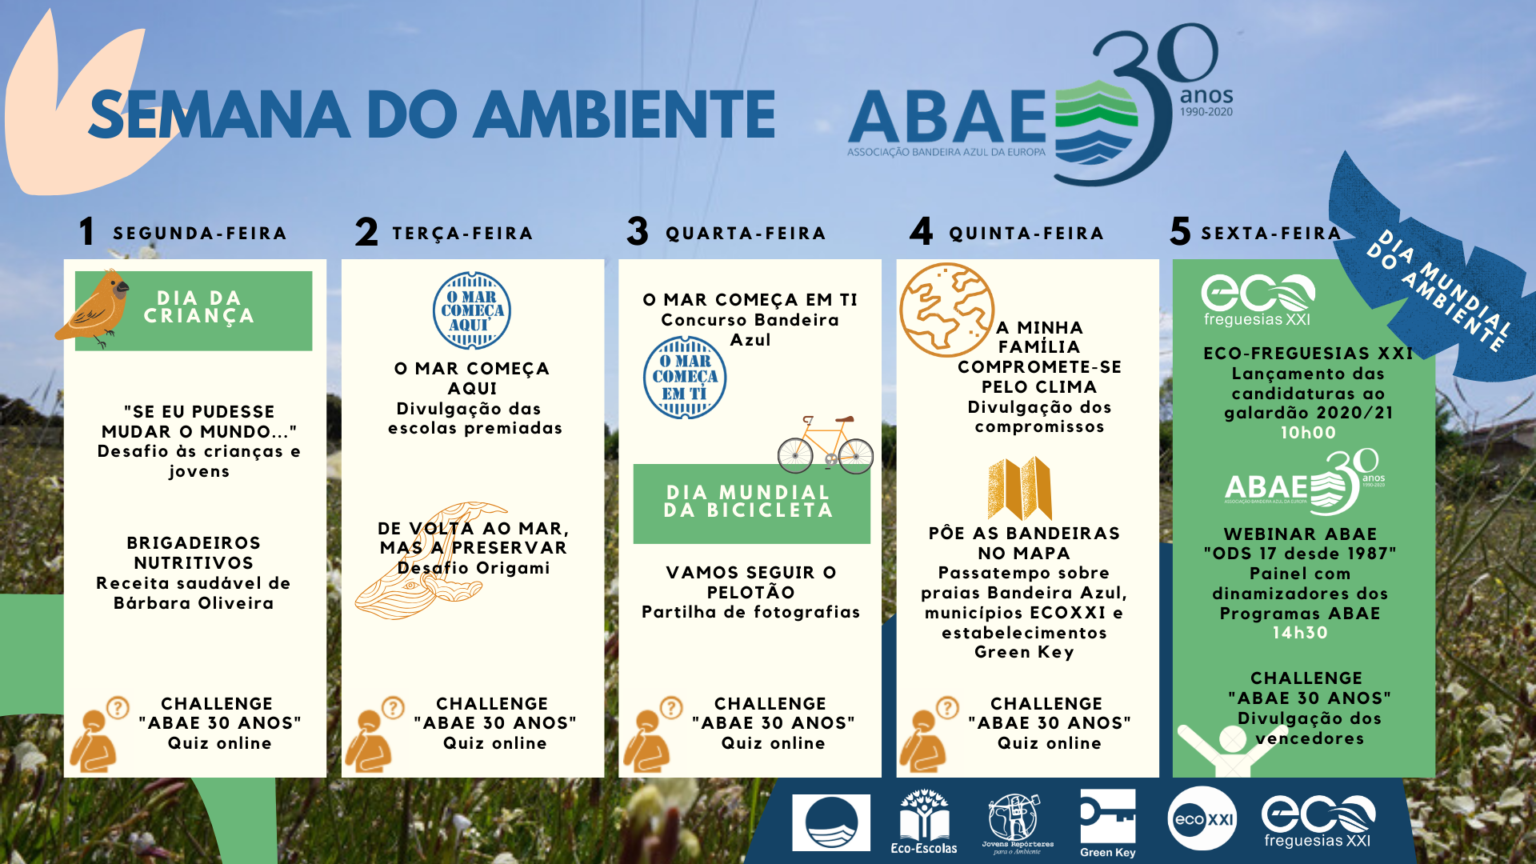 Semana-do-Ambiente-ABAE-4-1536x864 (2).png